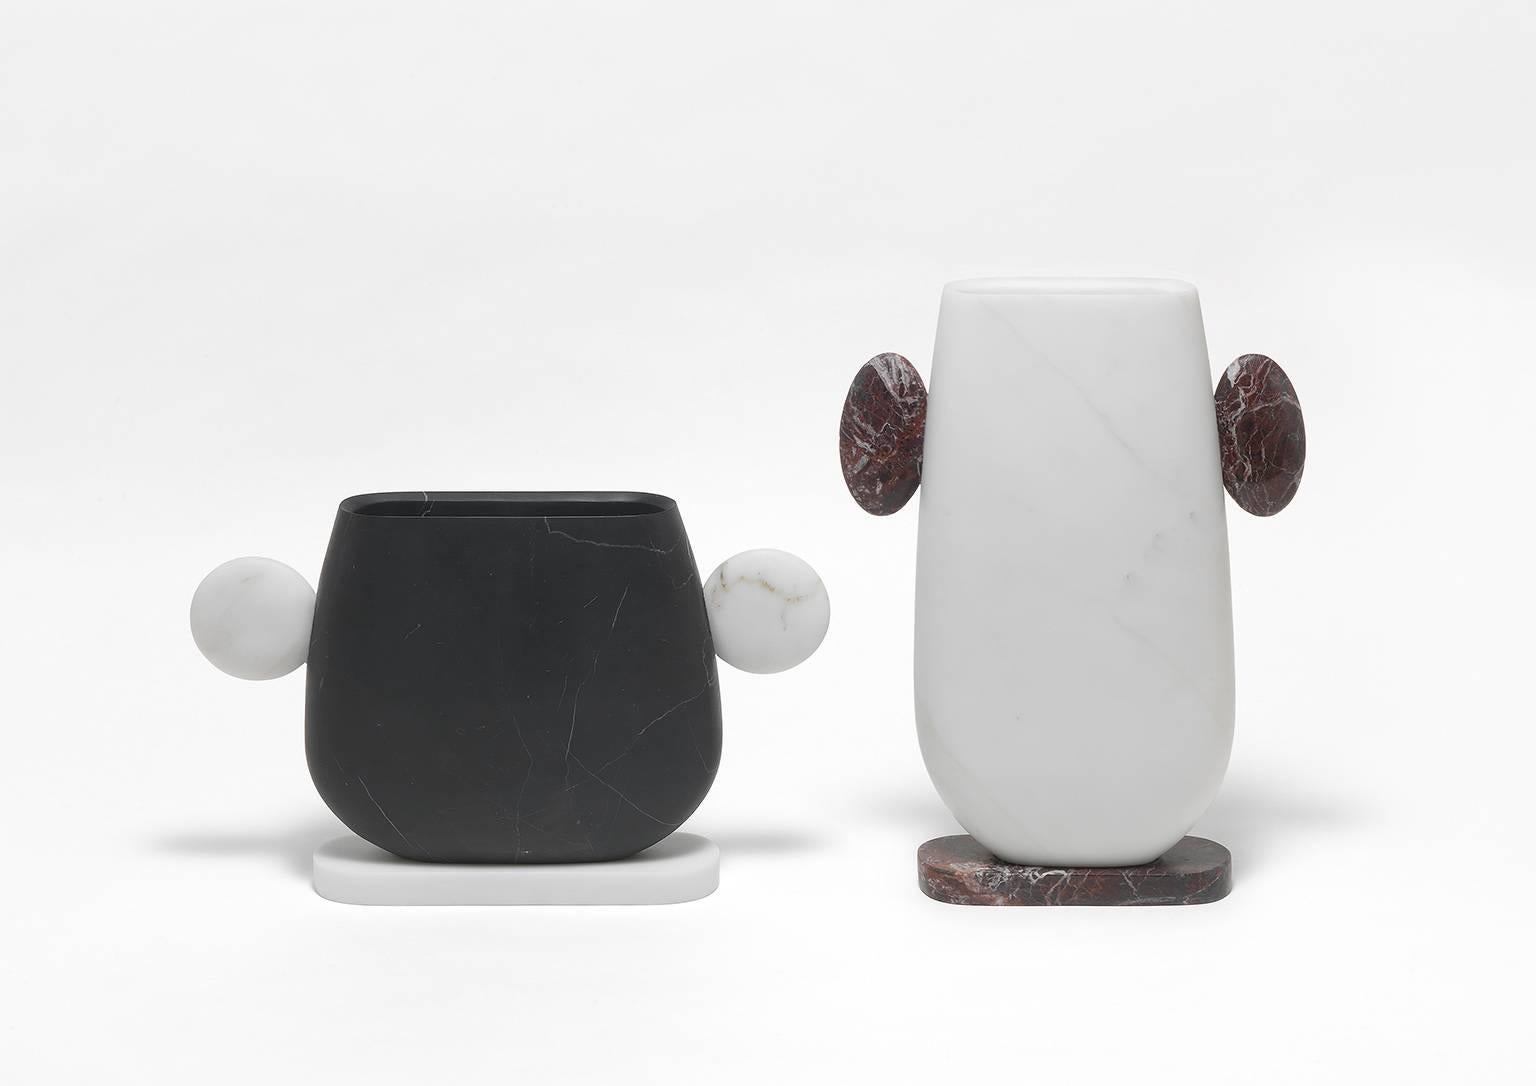 
Vase in white Michelangelo, red Levanto and black Marquinia Marbles.
Size: 27.3 x 38.4 x 7.3 cm, smooth finishing. Commercial name: Pietro, Homage Collection by the Italian designer Matteo Cibic. Made in Italy, hand finished.
“A painter’s drawings